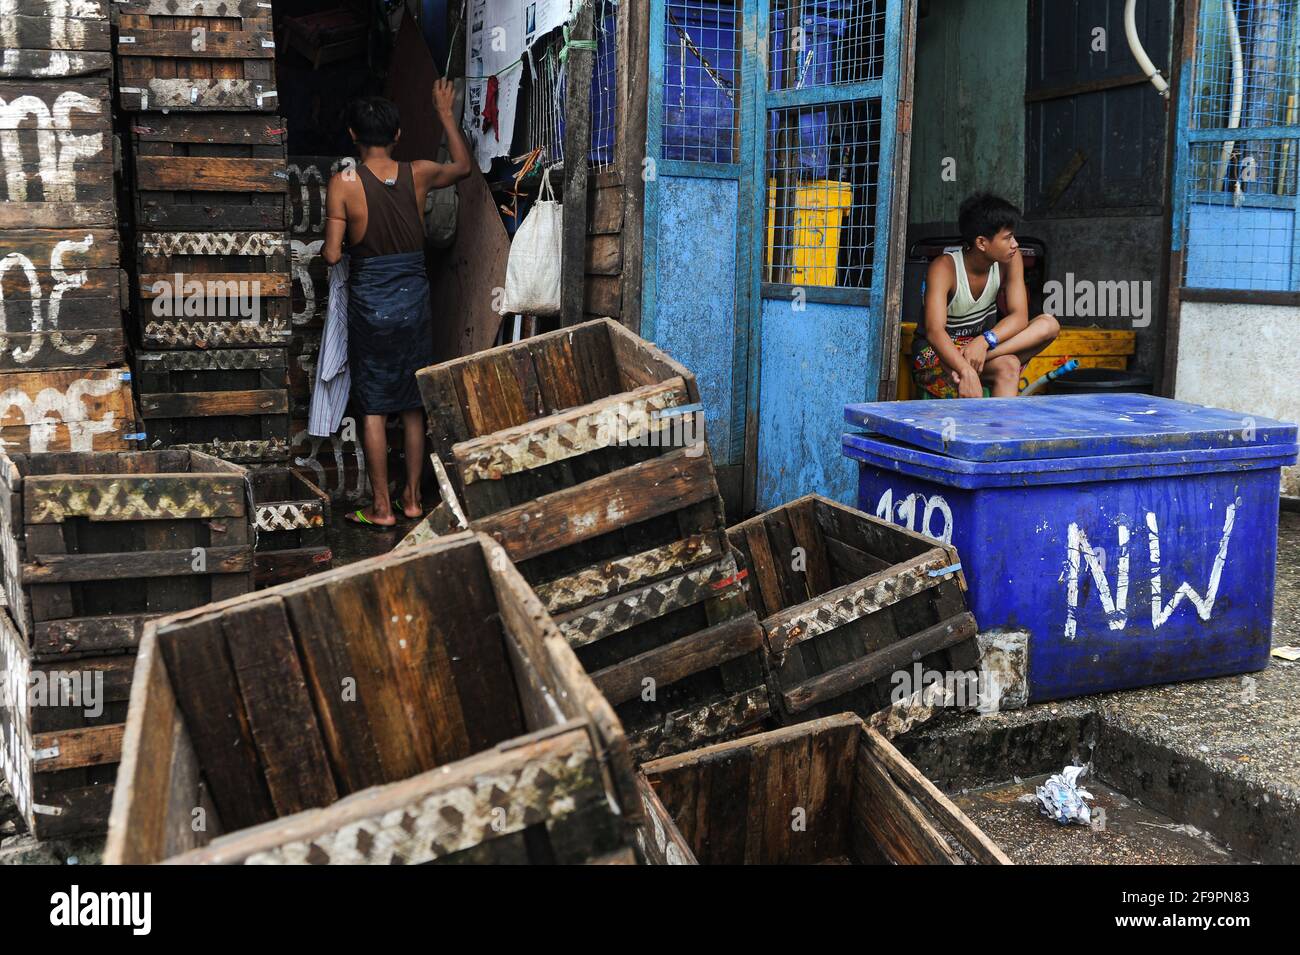 28.06.2014, Yangon, , Myanmar - Workers surrounded by empty wooden crates and refrigerated boxes at the traditional Baho San Pya fish market, a wholes Stock Photo